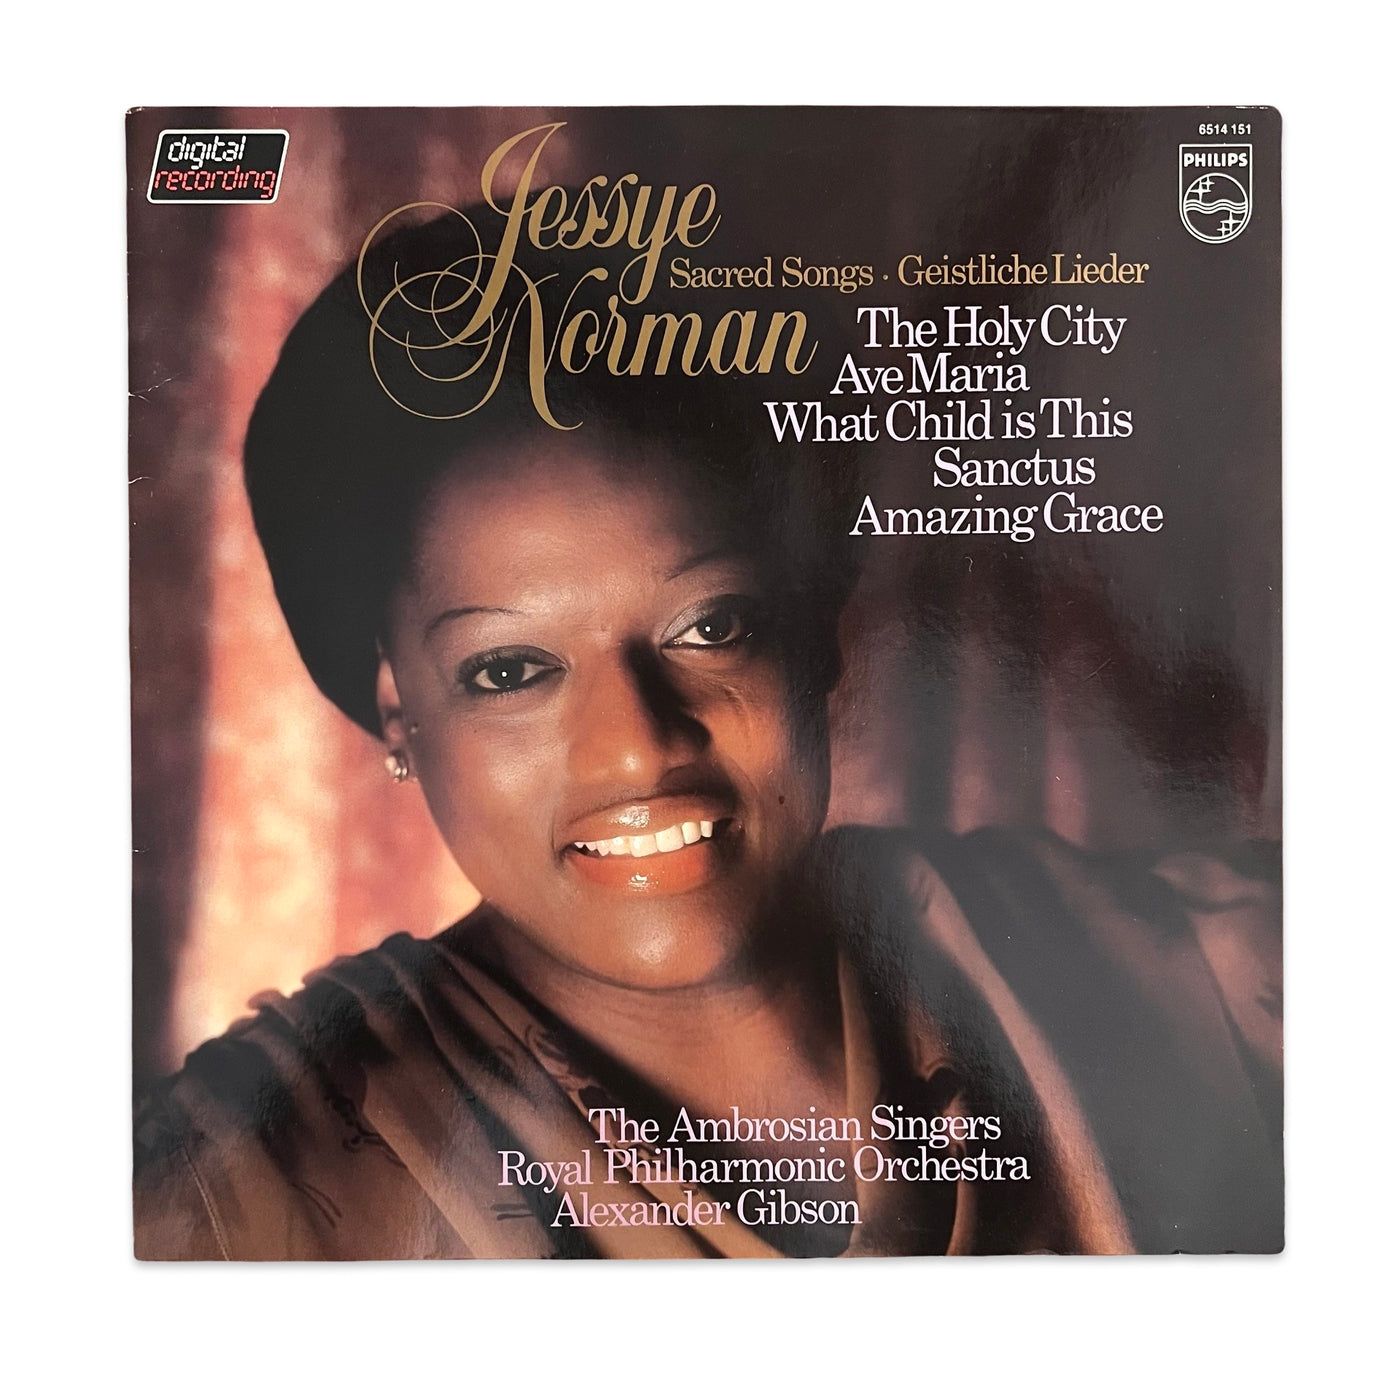 Jessye Norman / The Ambrosian Singers / Royal Philharmonic Orchestra / Alexander Gibson – Sacred Songs - Geistliche Lieder (1981)